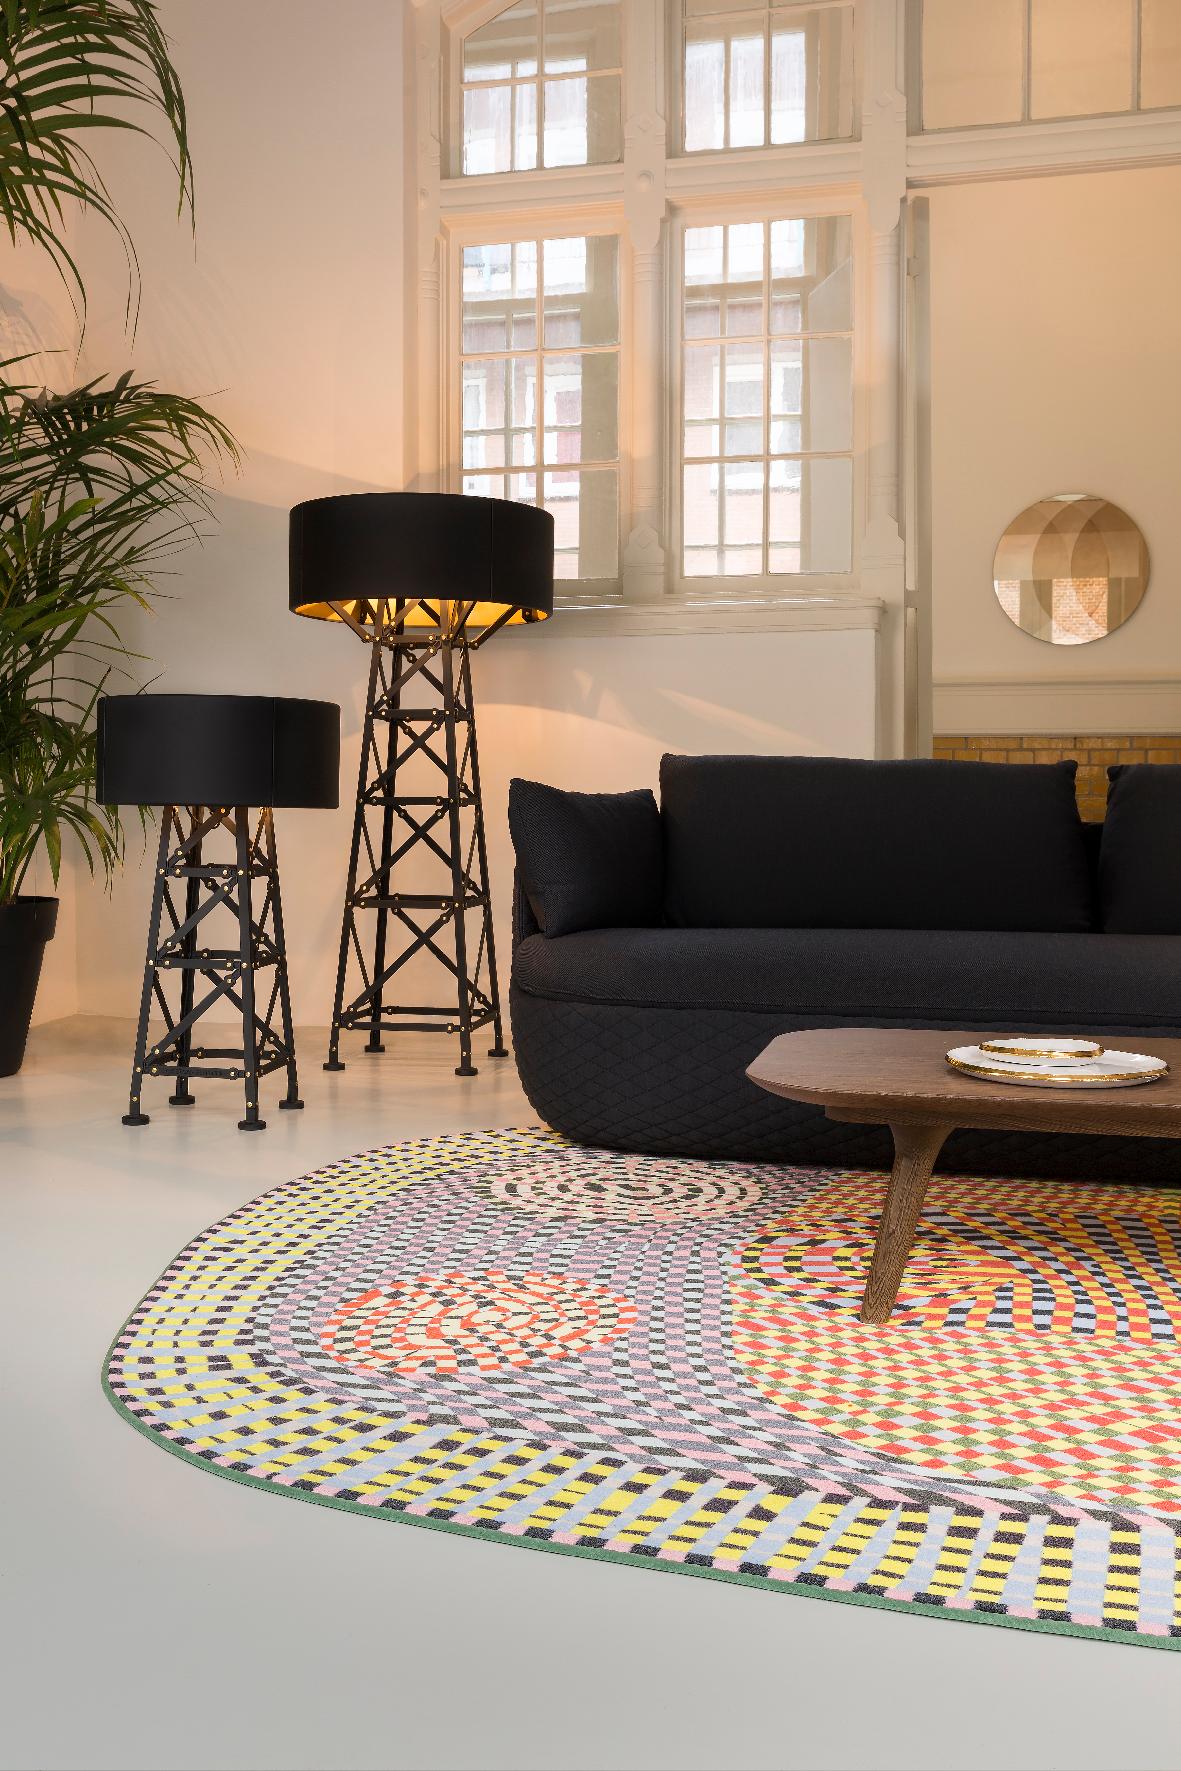 Moooi magic marker wild rug in low pile polyamide by Bertjan Pot

Bertjan Pot is a designer, probably best known for his Random Light (1999).The light started as a material experiment, which is basically the start of each product created by Studio